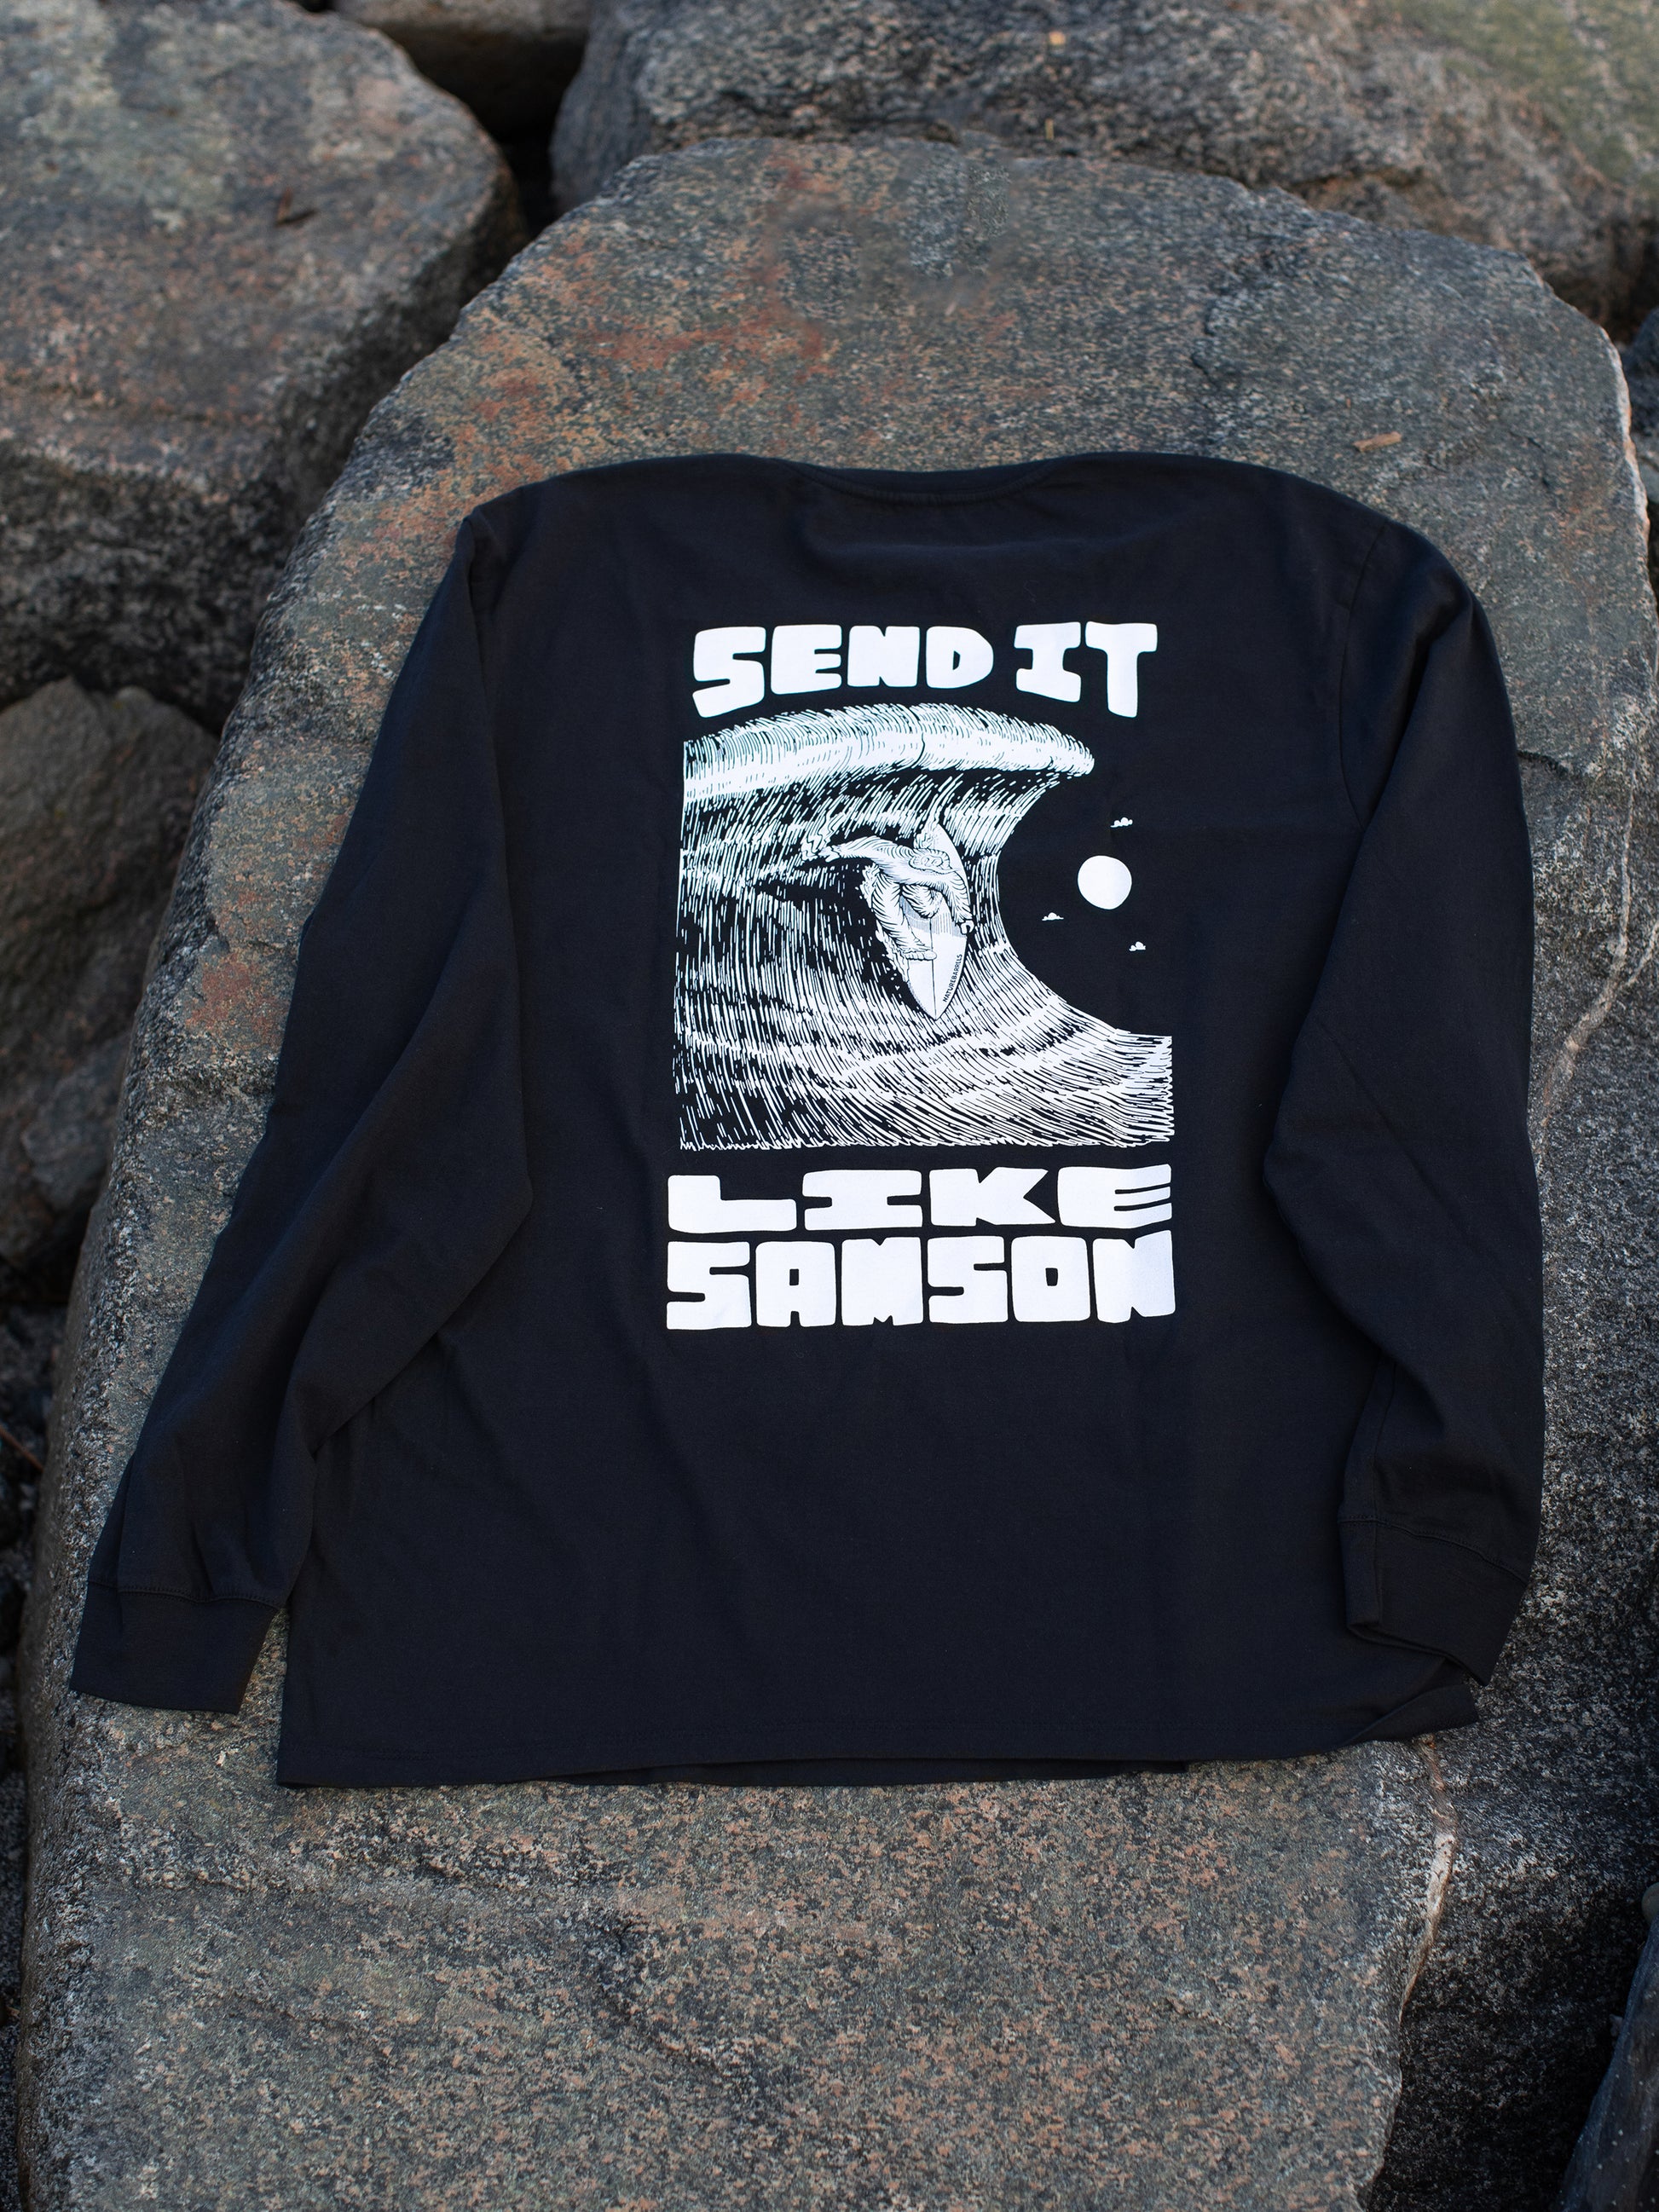 Black long sleeve t-shirt with large white graphic in the back featuring 'SEND IT LIKE SAMSON' text and an illustration of a sasquatch riding a large wave, laid on a rocky surface.